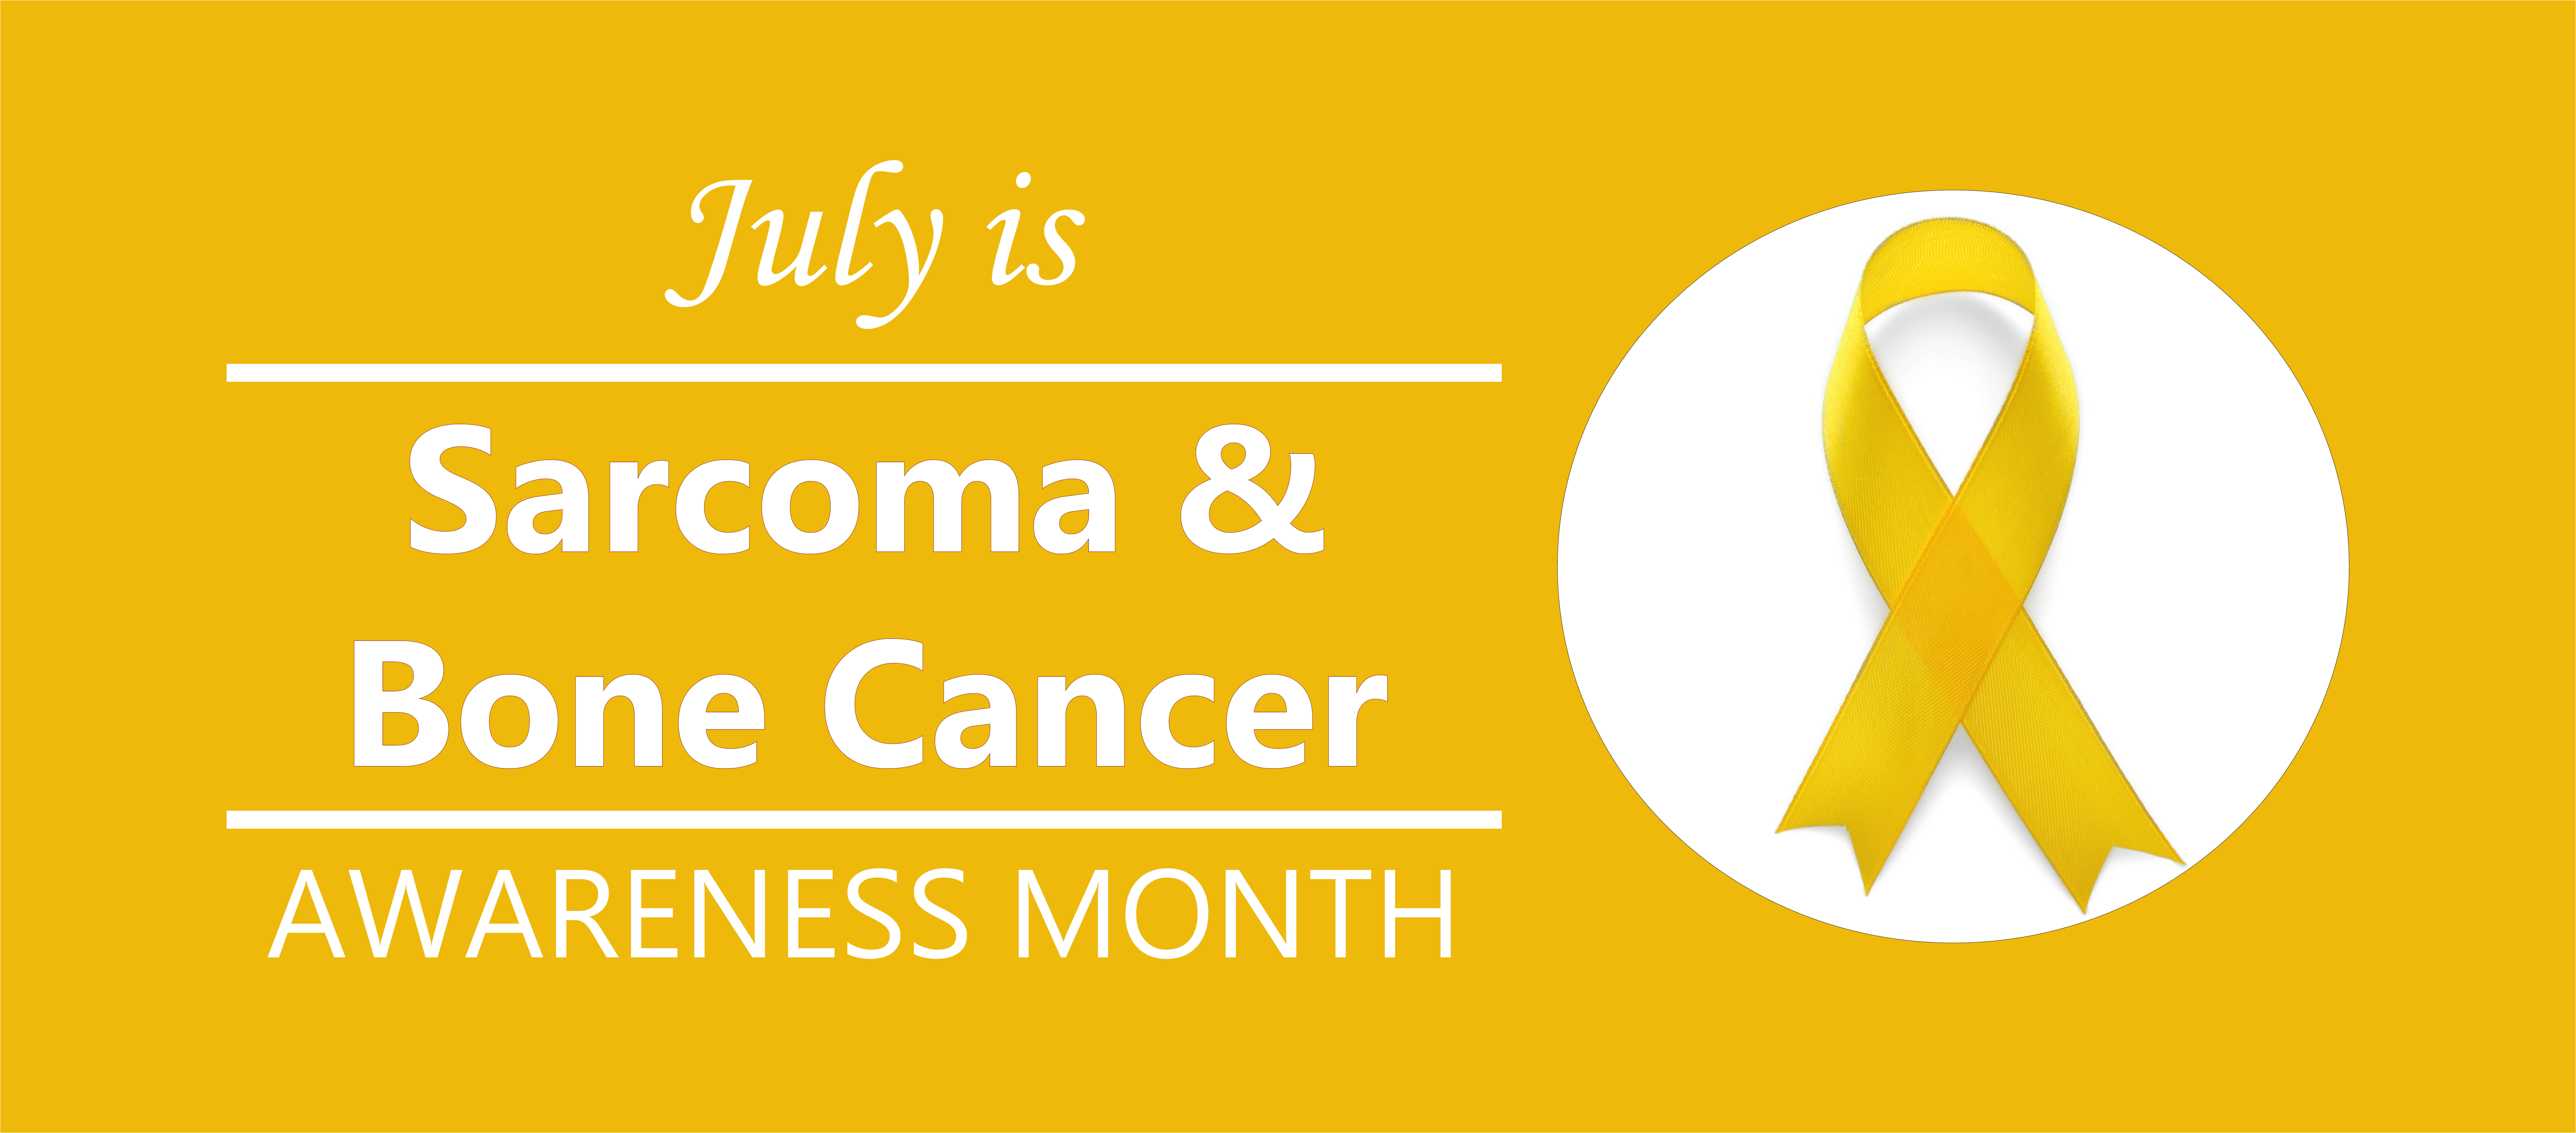 July is Sarcoma & Bone Cancer Awareness Month